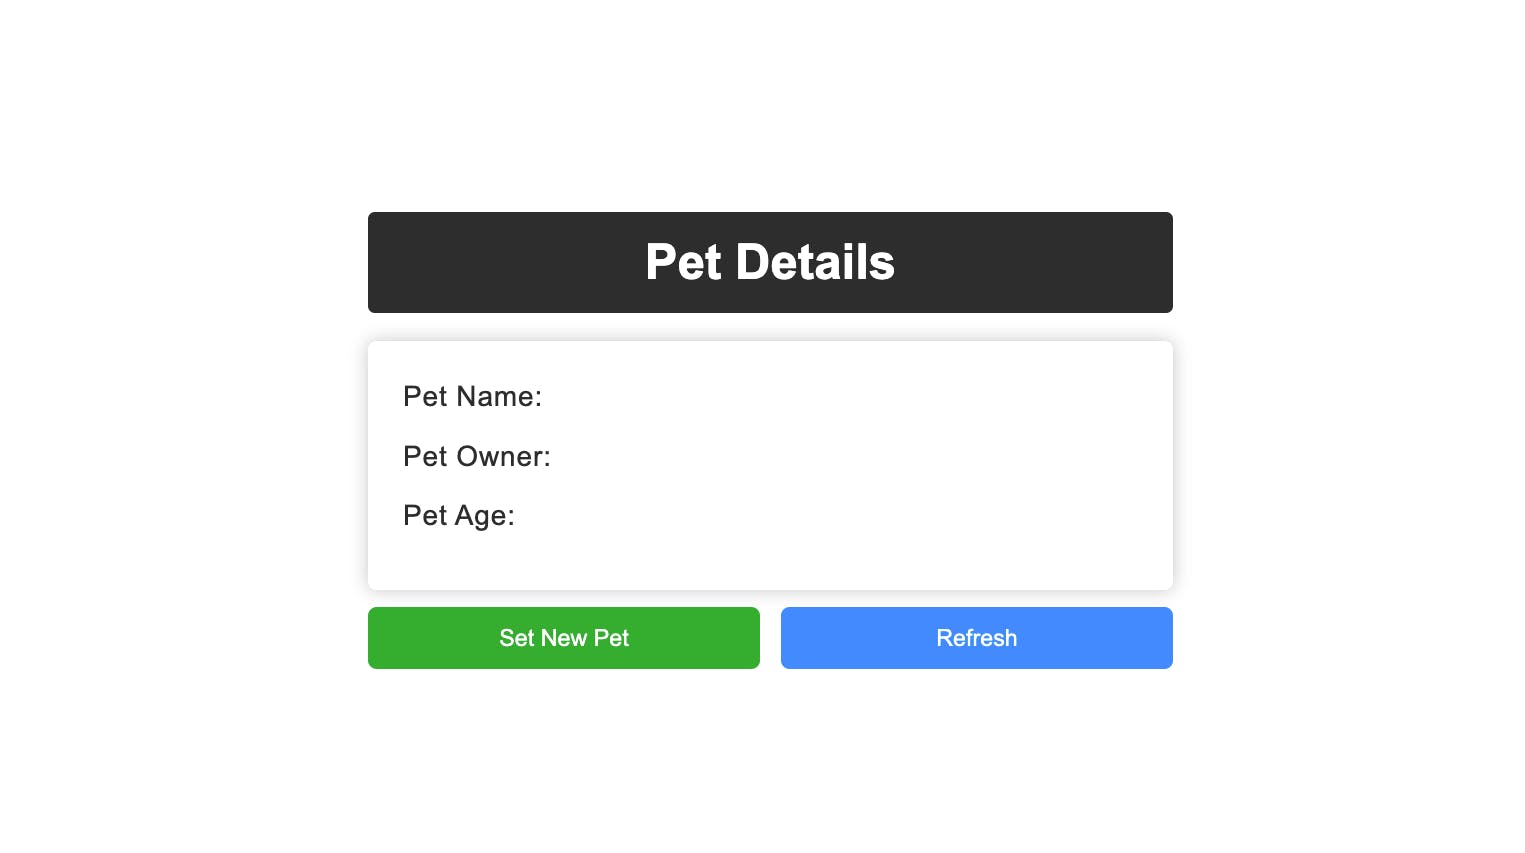 The output of the pet details section